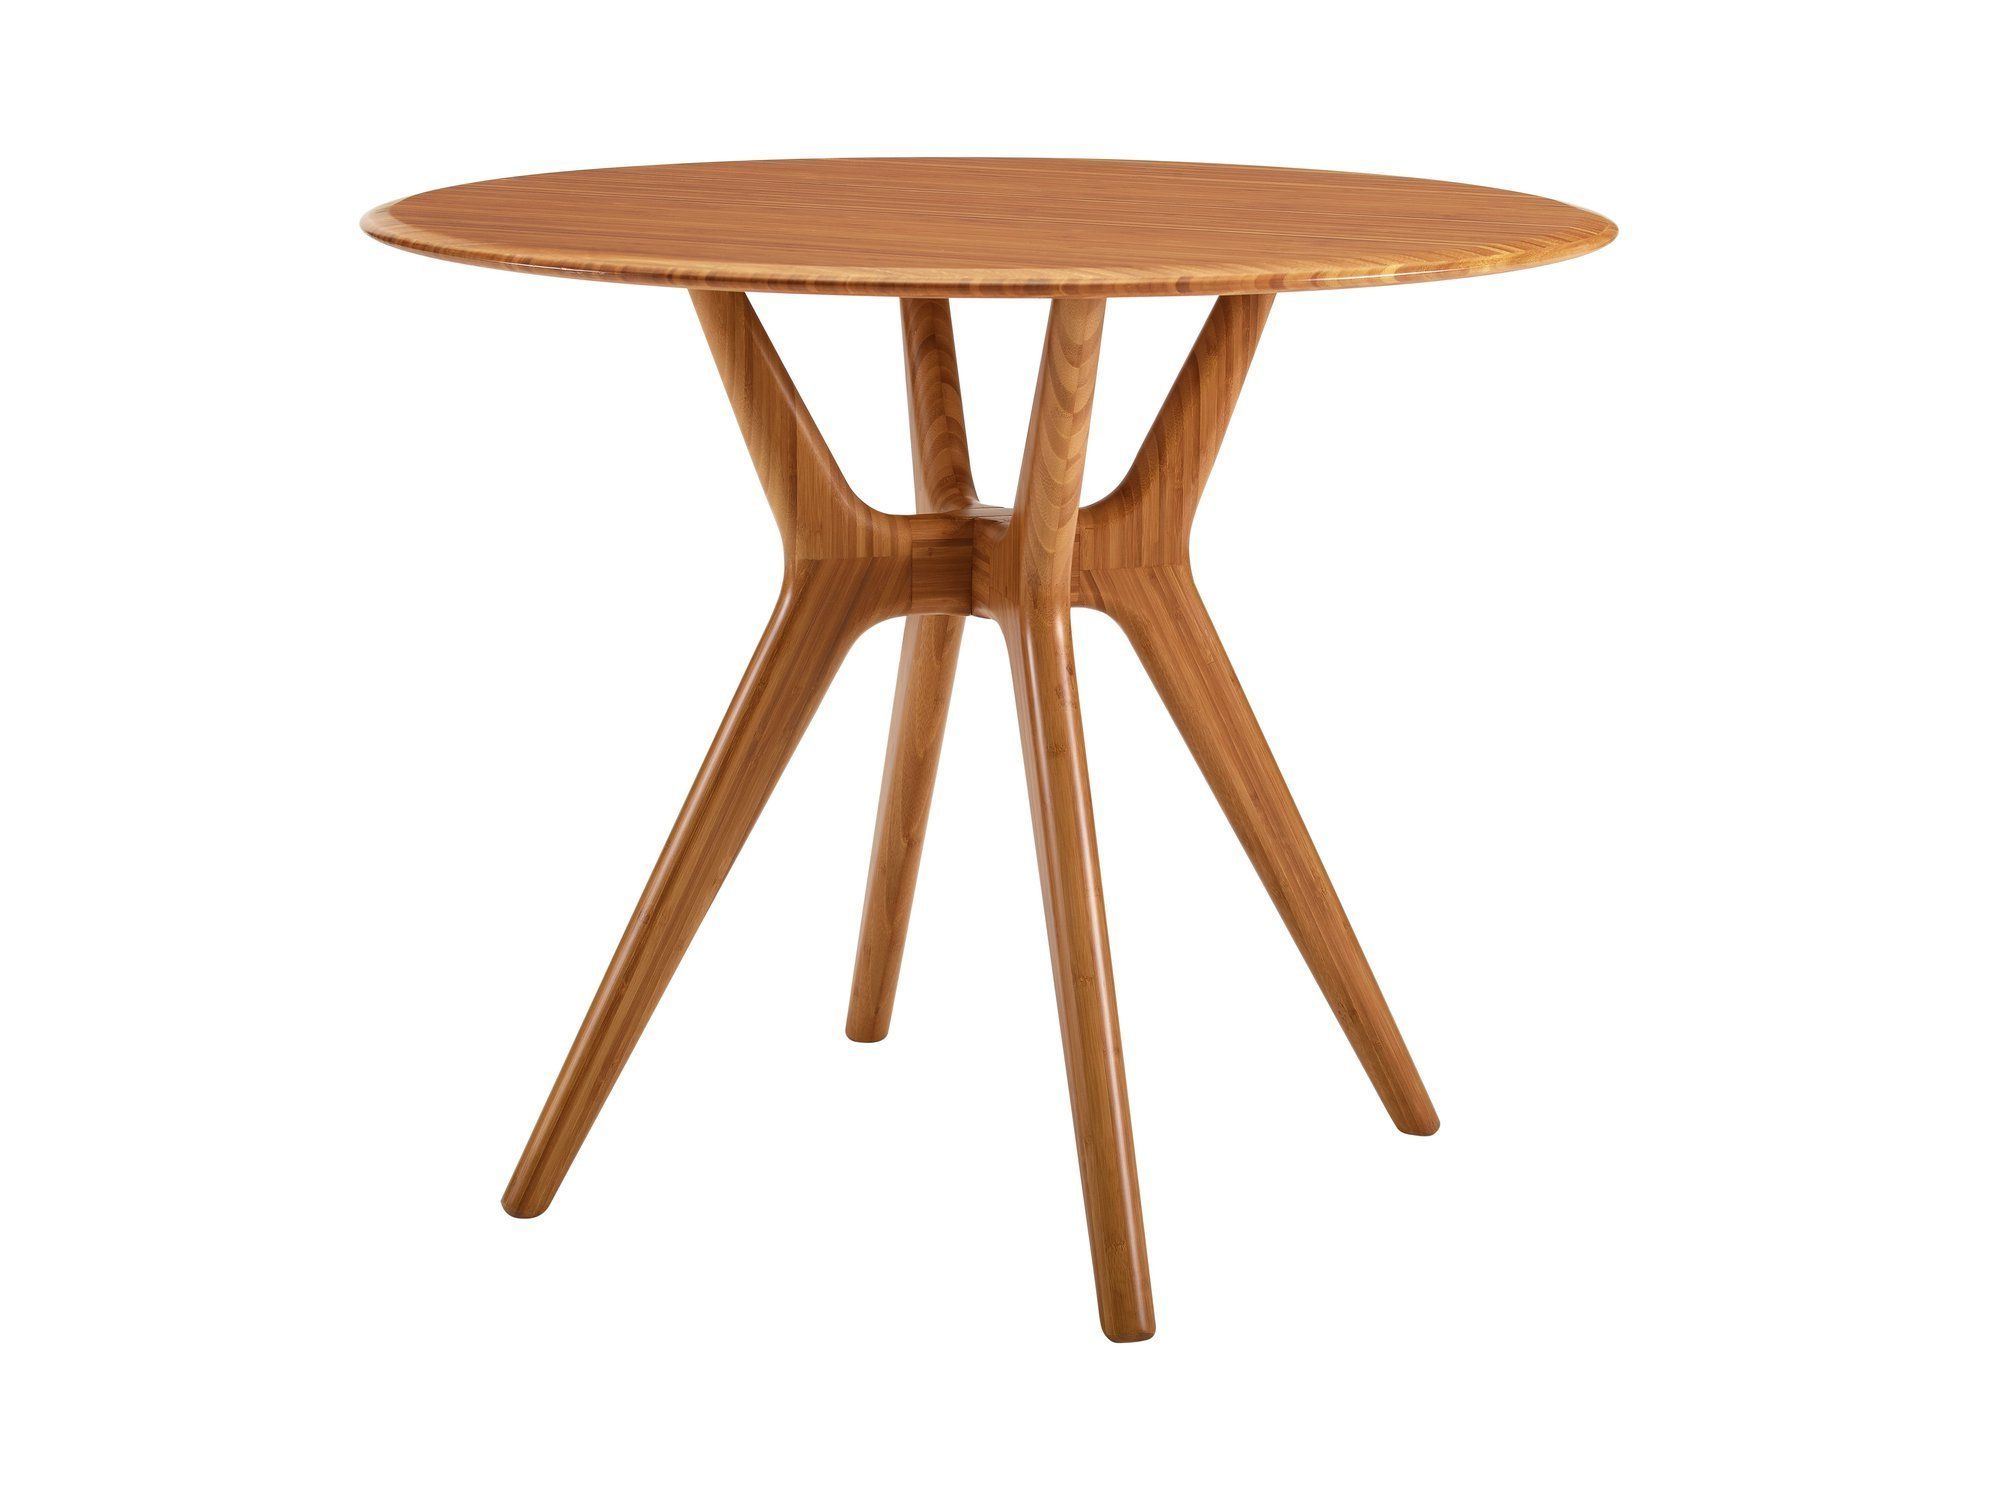 Preferred Sitka 36" Round Dining Table │ Eco Friendly Digs With Regard To Caramalized Outdoor Tables (View 6 of 15)